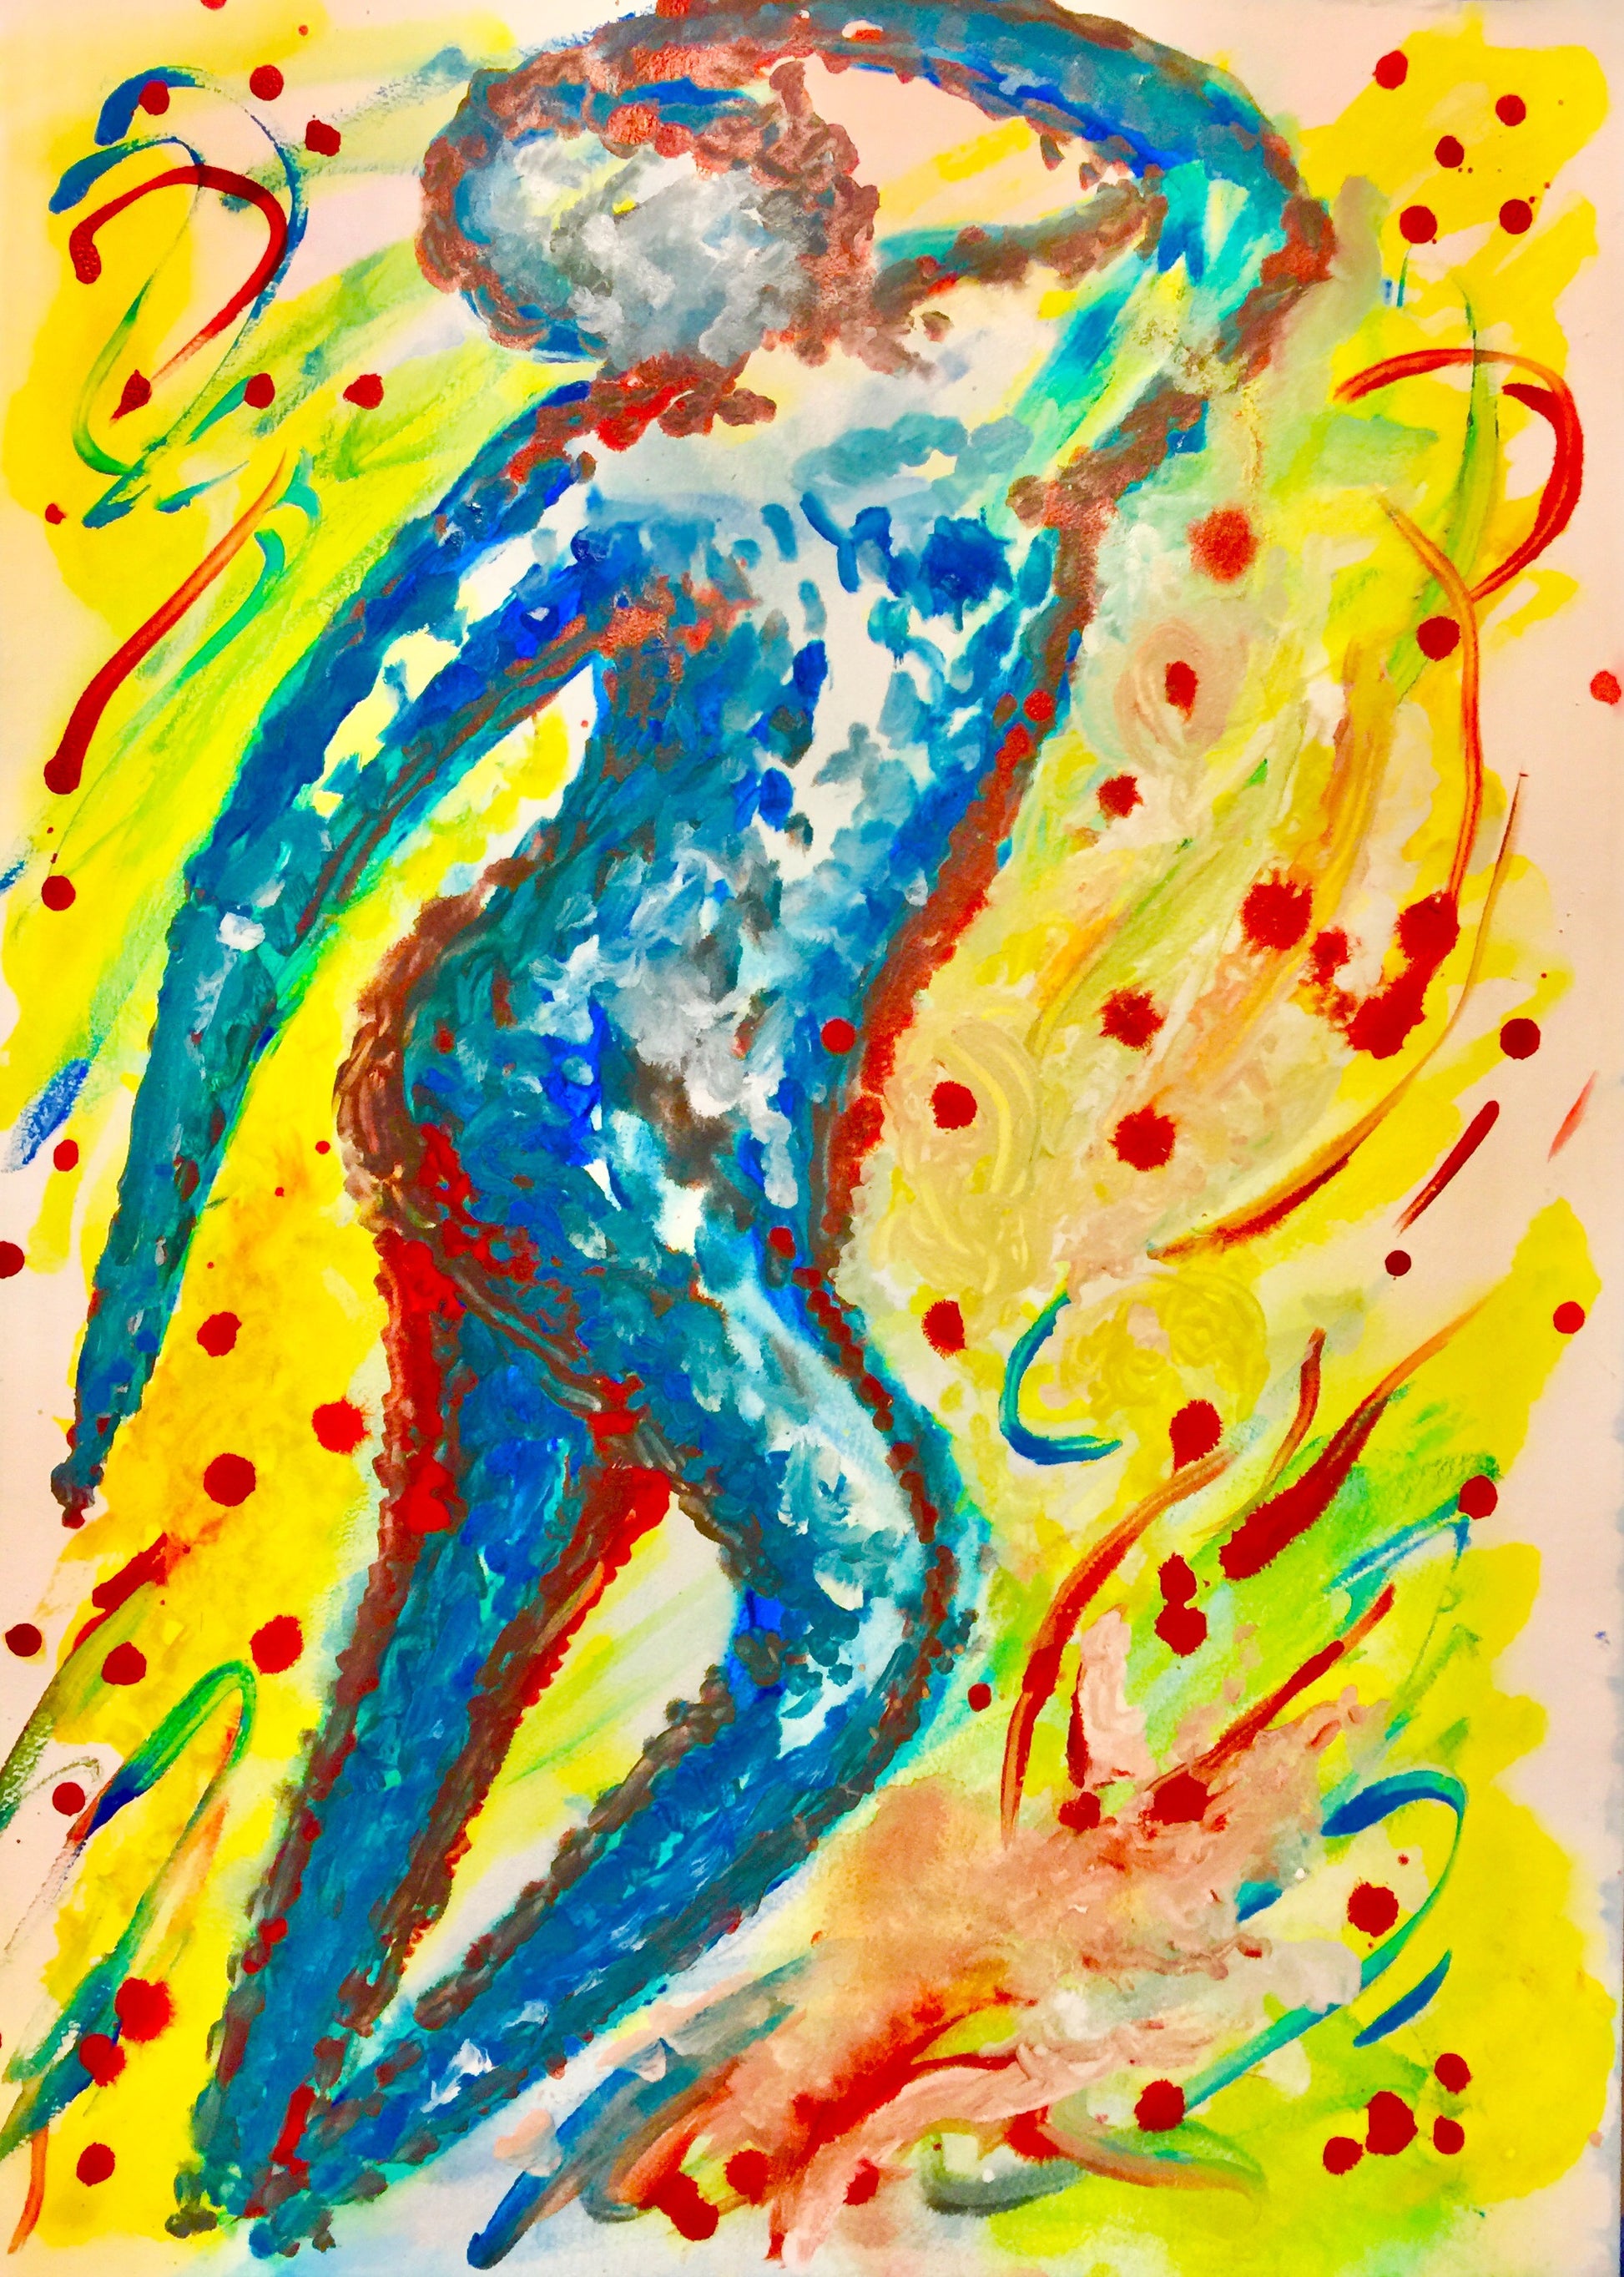 blaze_of_glory] - Sonarta.com Now, I am ready!!!! Watch me as I Strike A Pose ! This painting is an Acrylic on Paper by Shahla Rahimi  Reynolds. Strike A Pose is 28 1/2” H X 20 1/4” W..